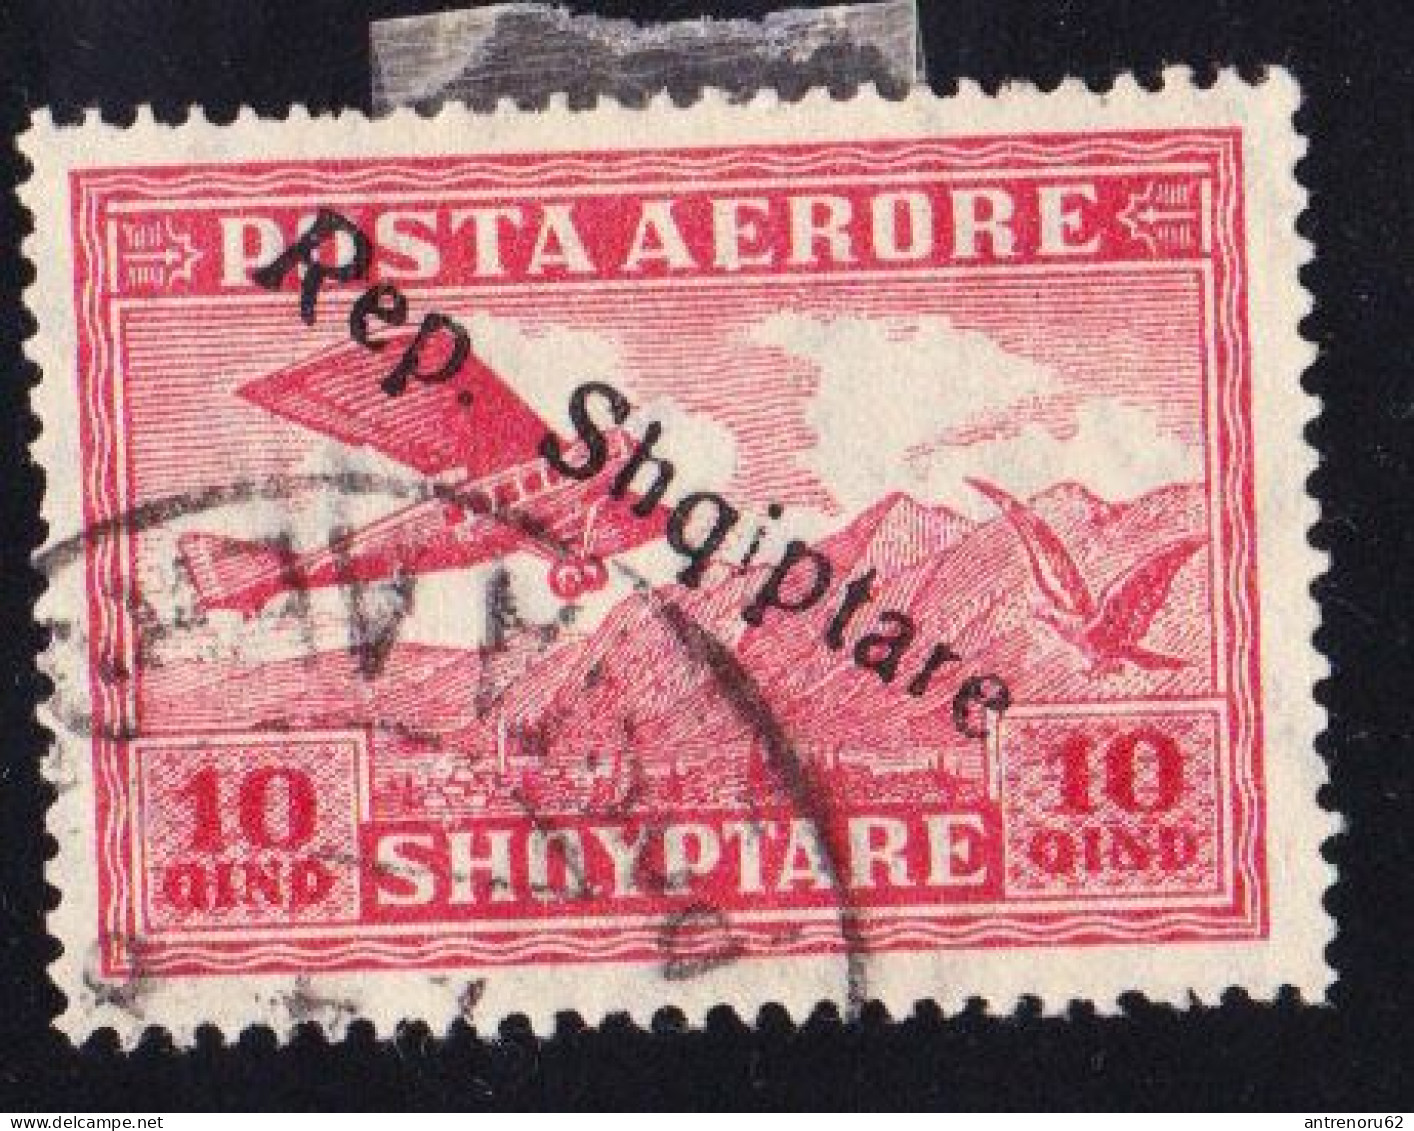 STAMPS-ALBANIA-1927-USED-SEE-SCAN - Albania